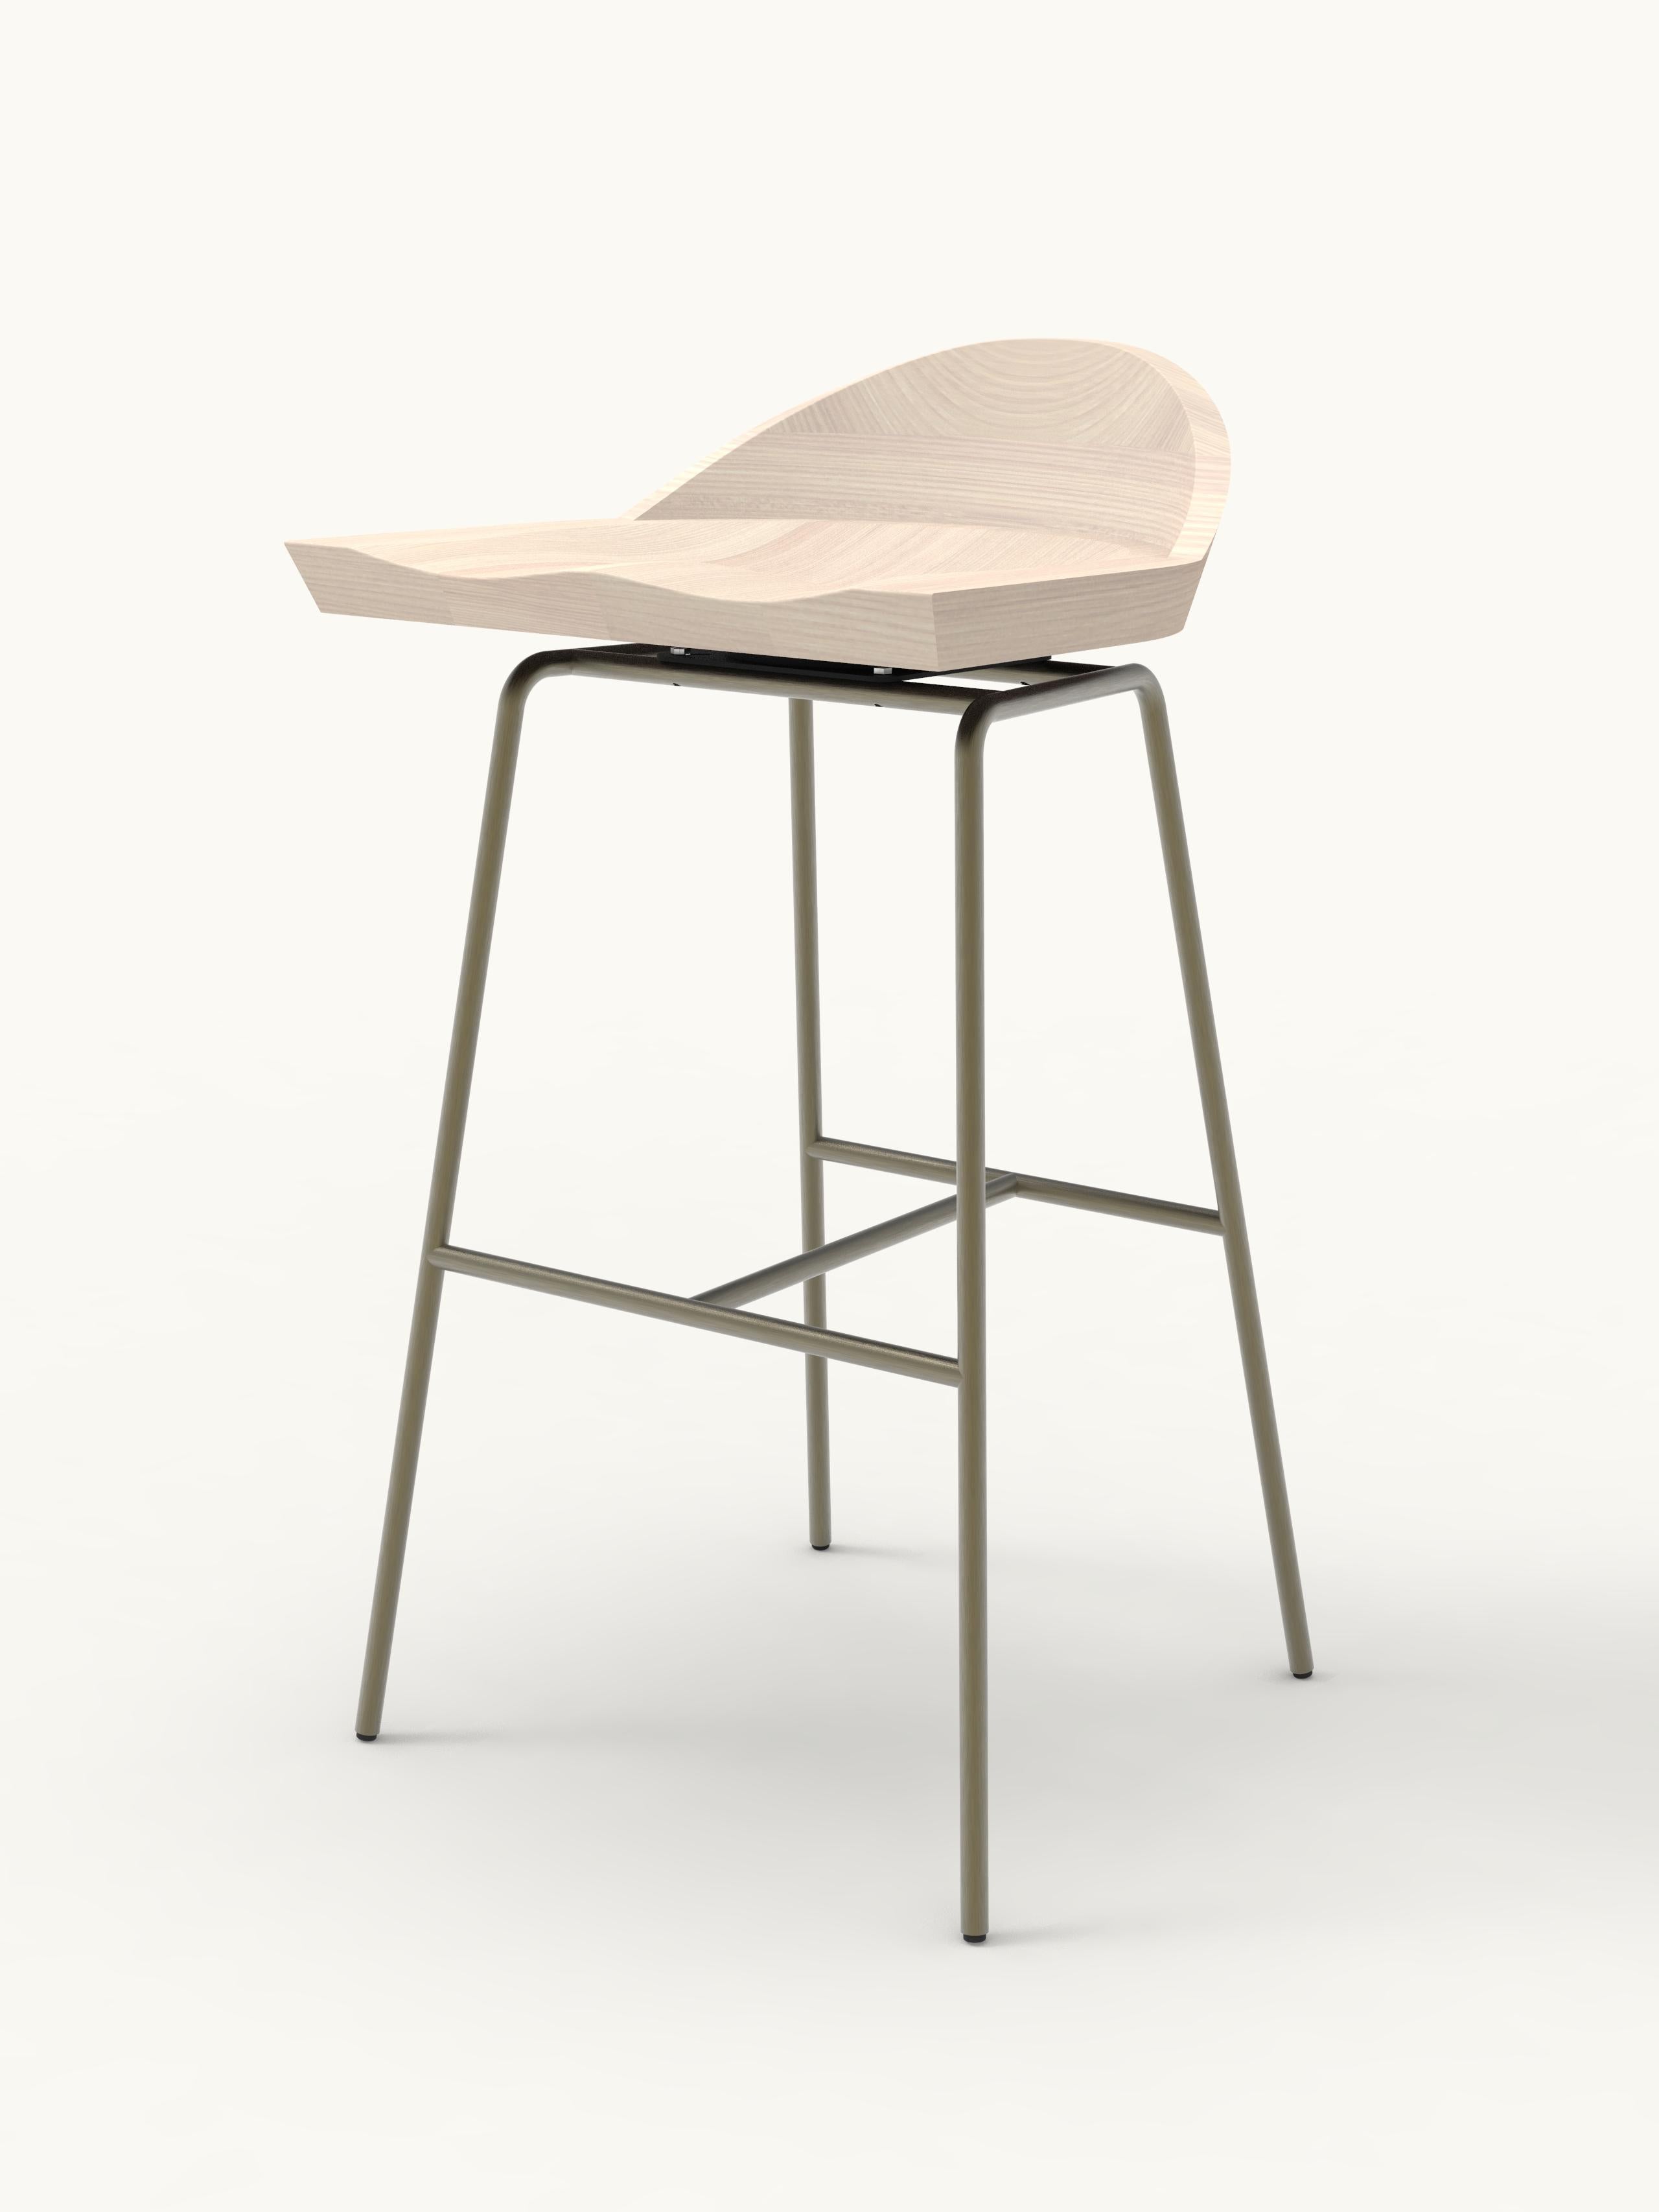 For Sale: Gray (Metal Bronze) Spindle Bar Stool in Solid White Ash and Steel Designed by Craig Bassam